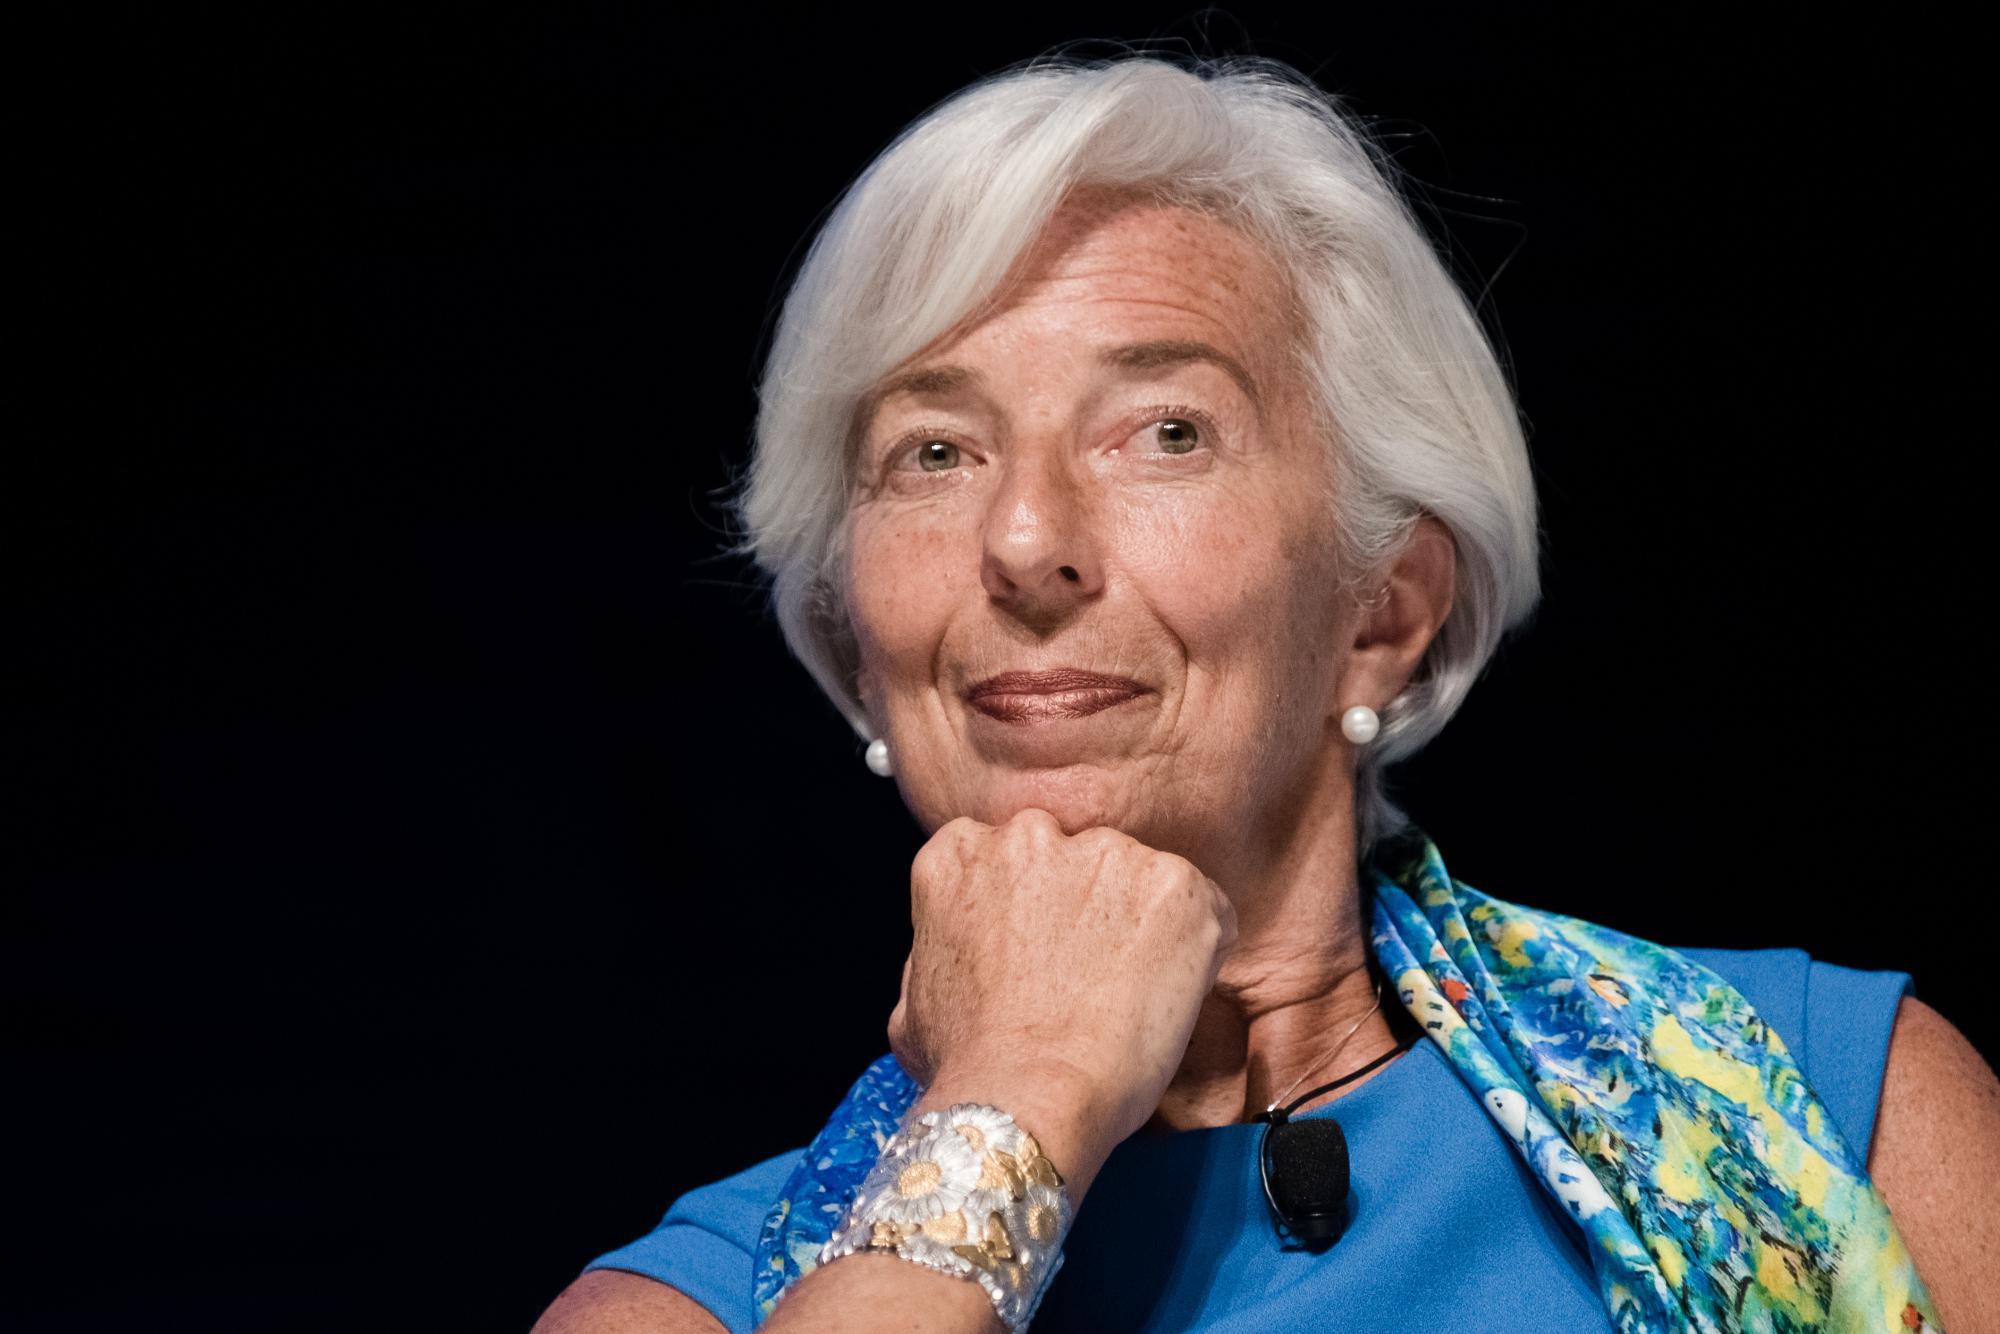 IMF Head Foresees the End of Banking and the Triumph of Cryptocurrency